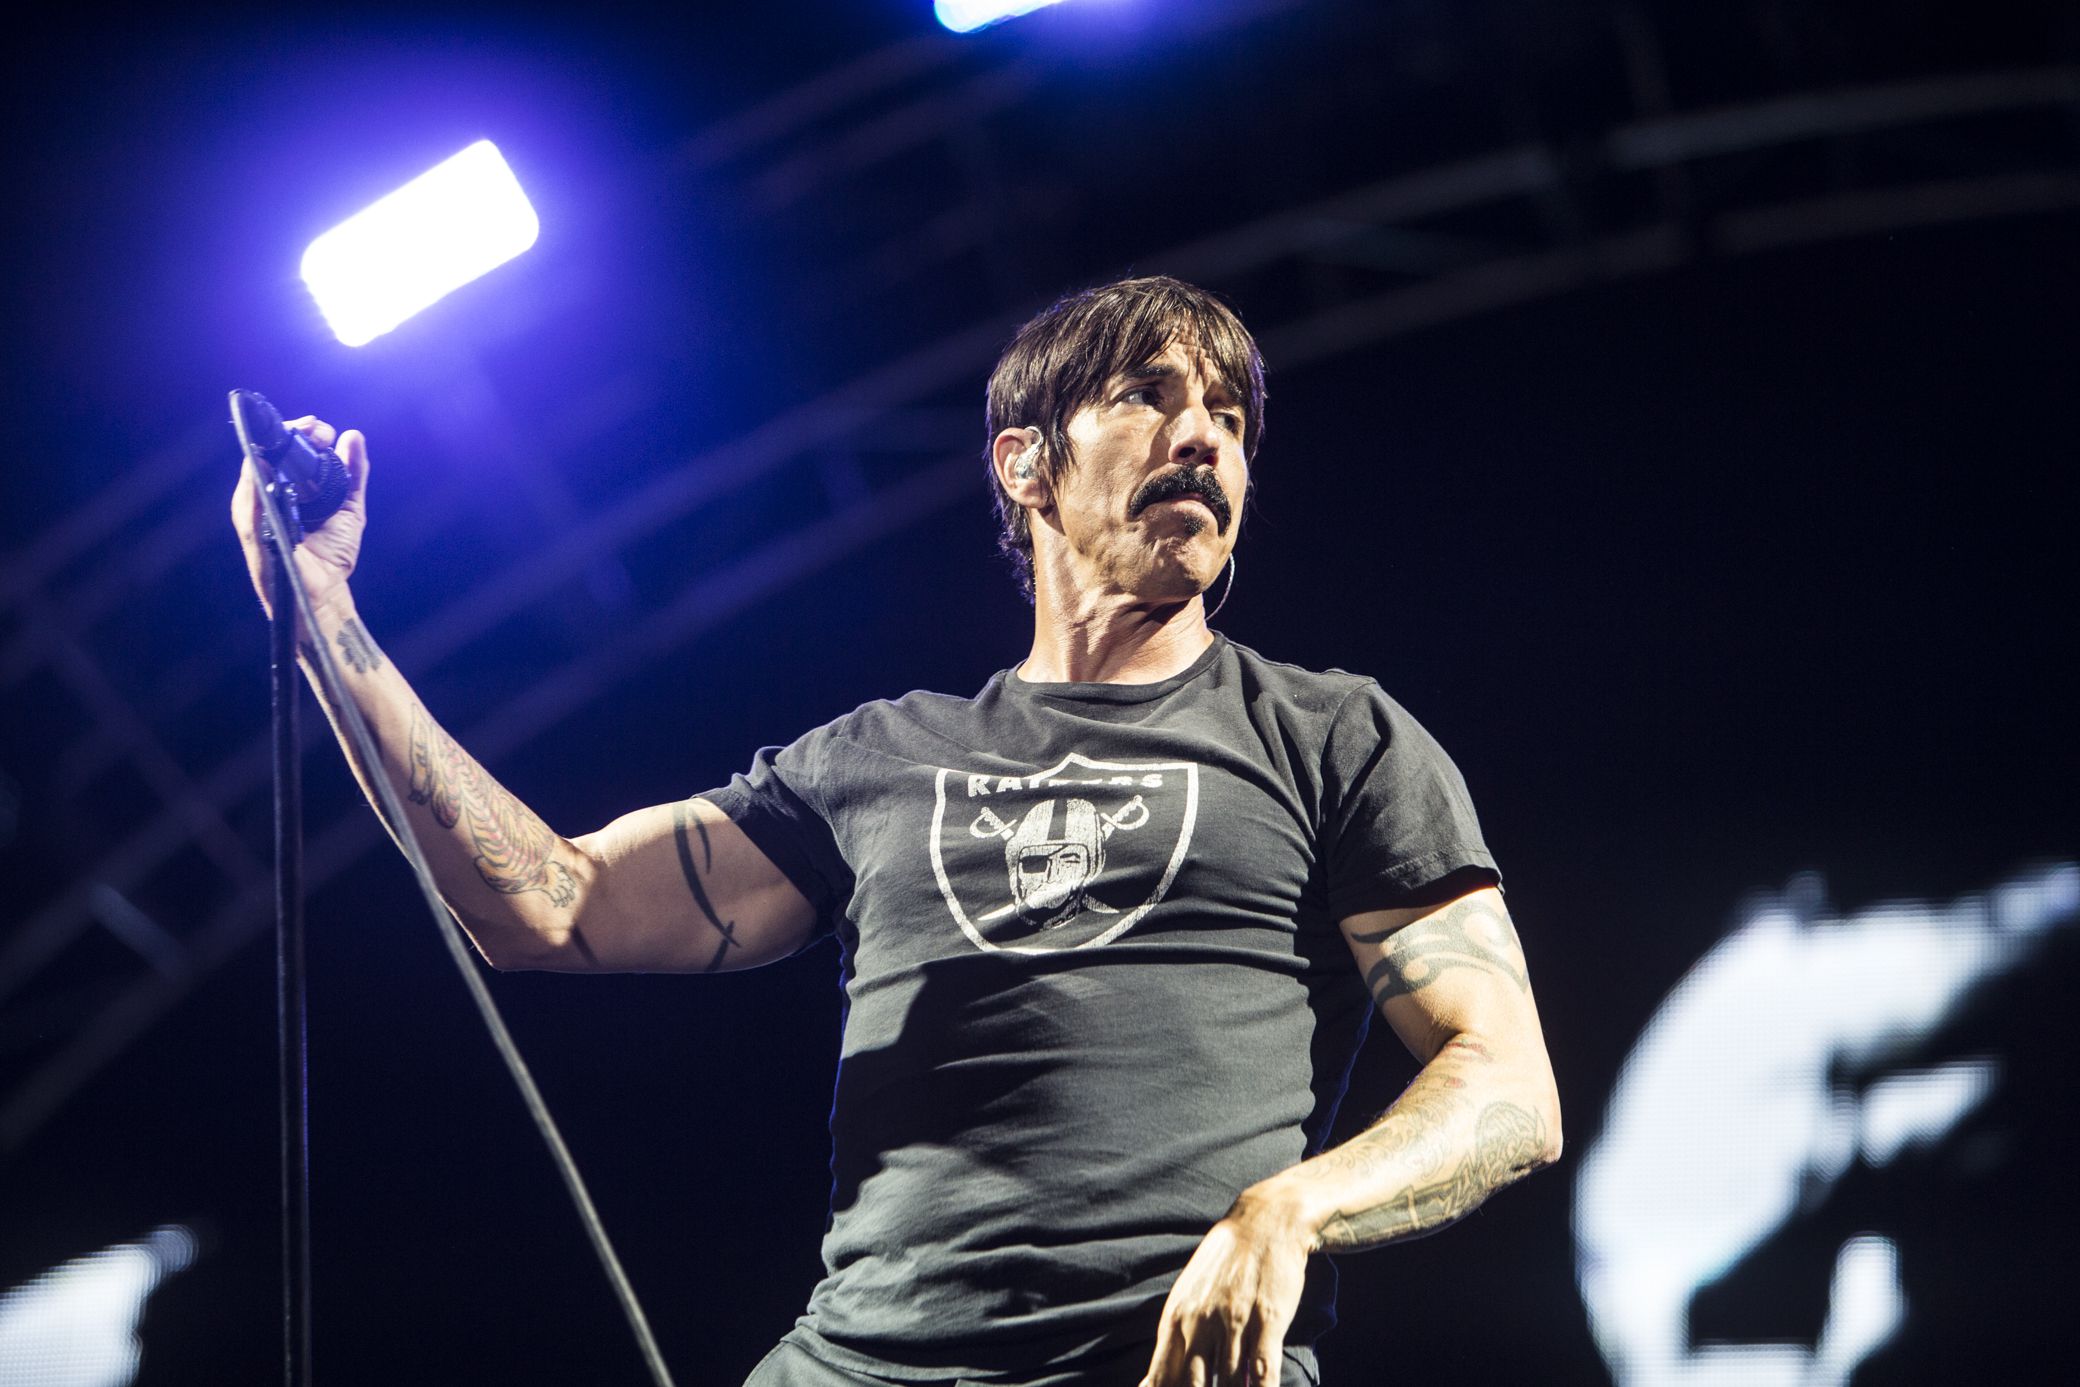 red hot chili peppers 3 KAABOO Del Mar Succeeds at Being a Festival for Everyone